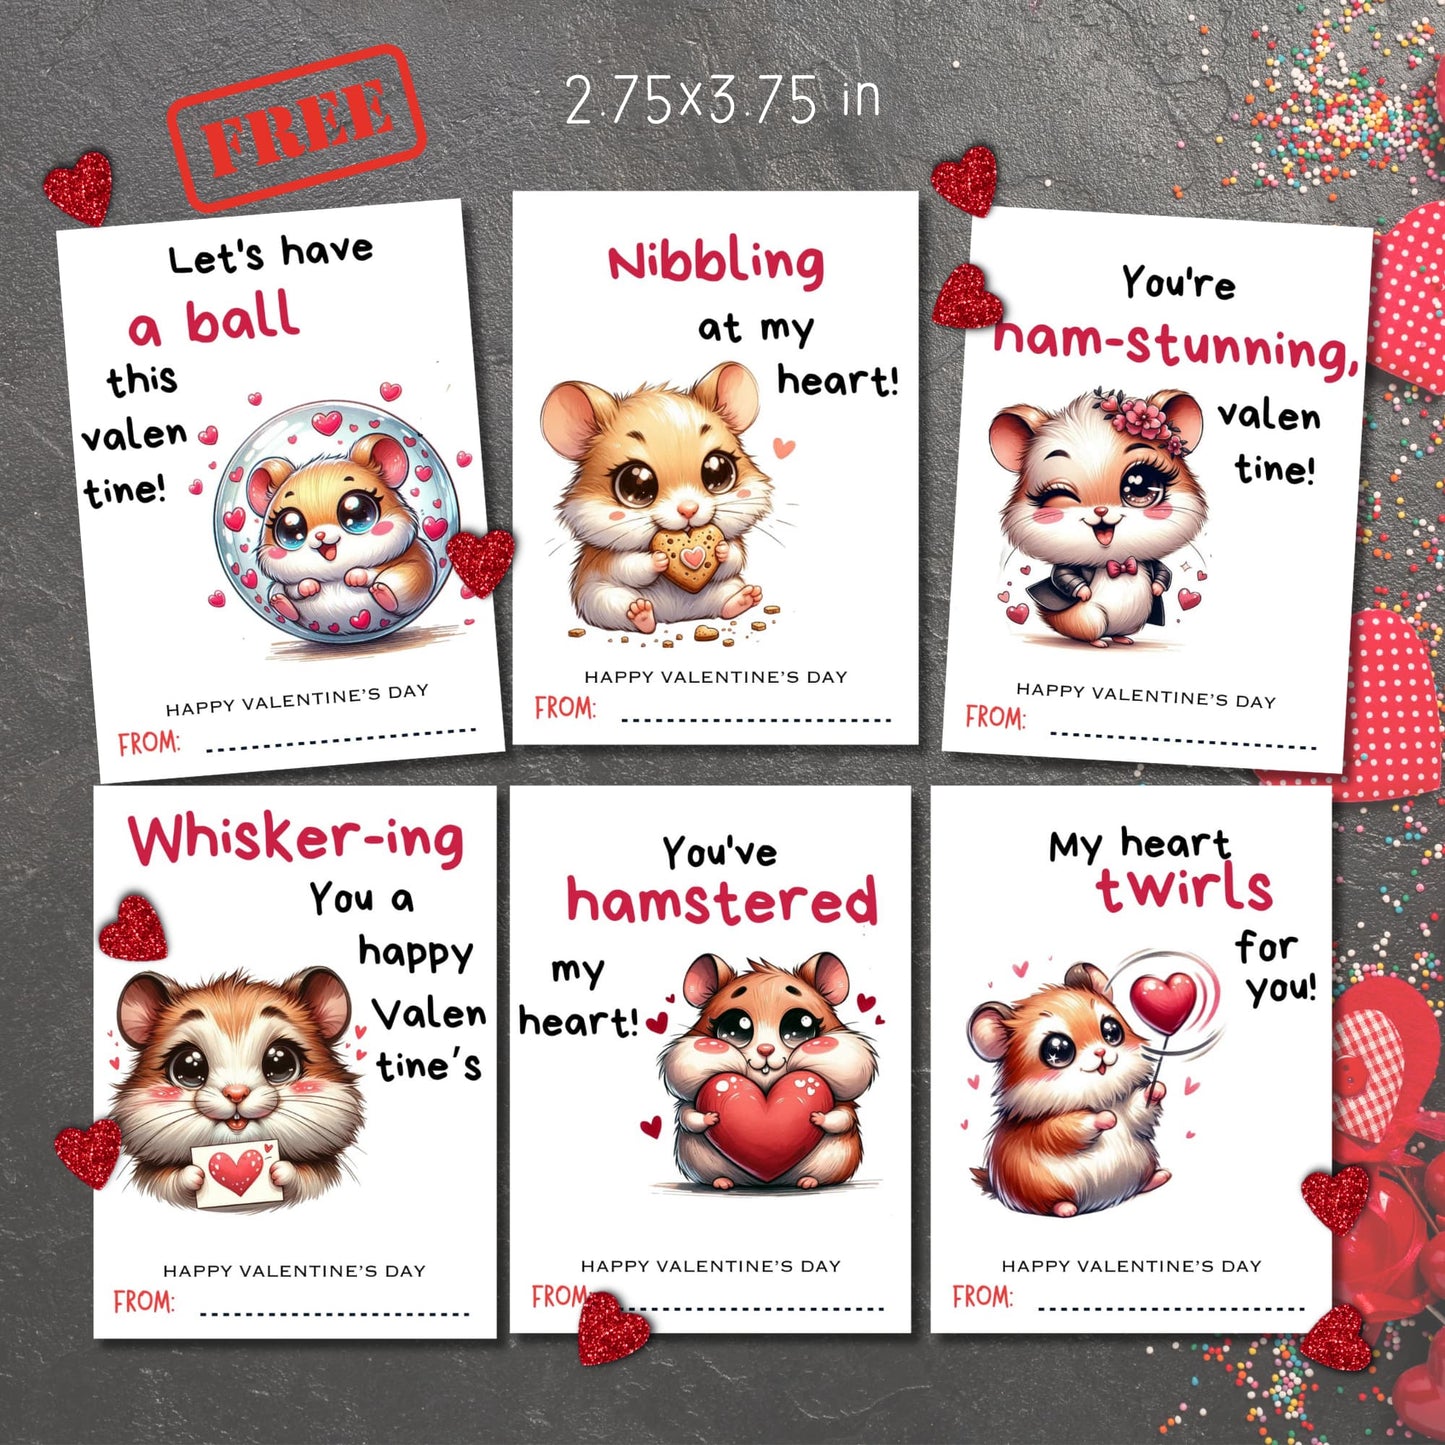 Six adorable 2.75x3.75 inch hamster-themed Valentine's cards for kids, showcasing unique designs perfect for sharing with friends